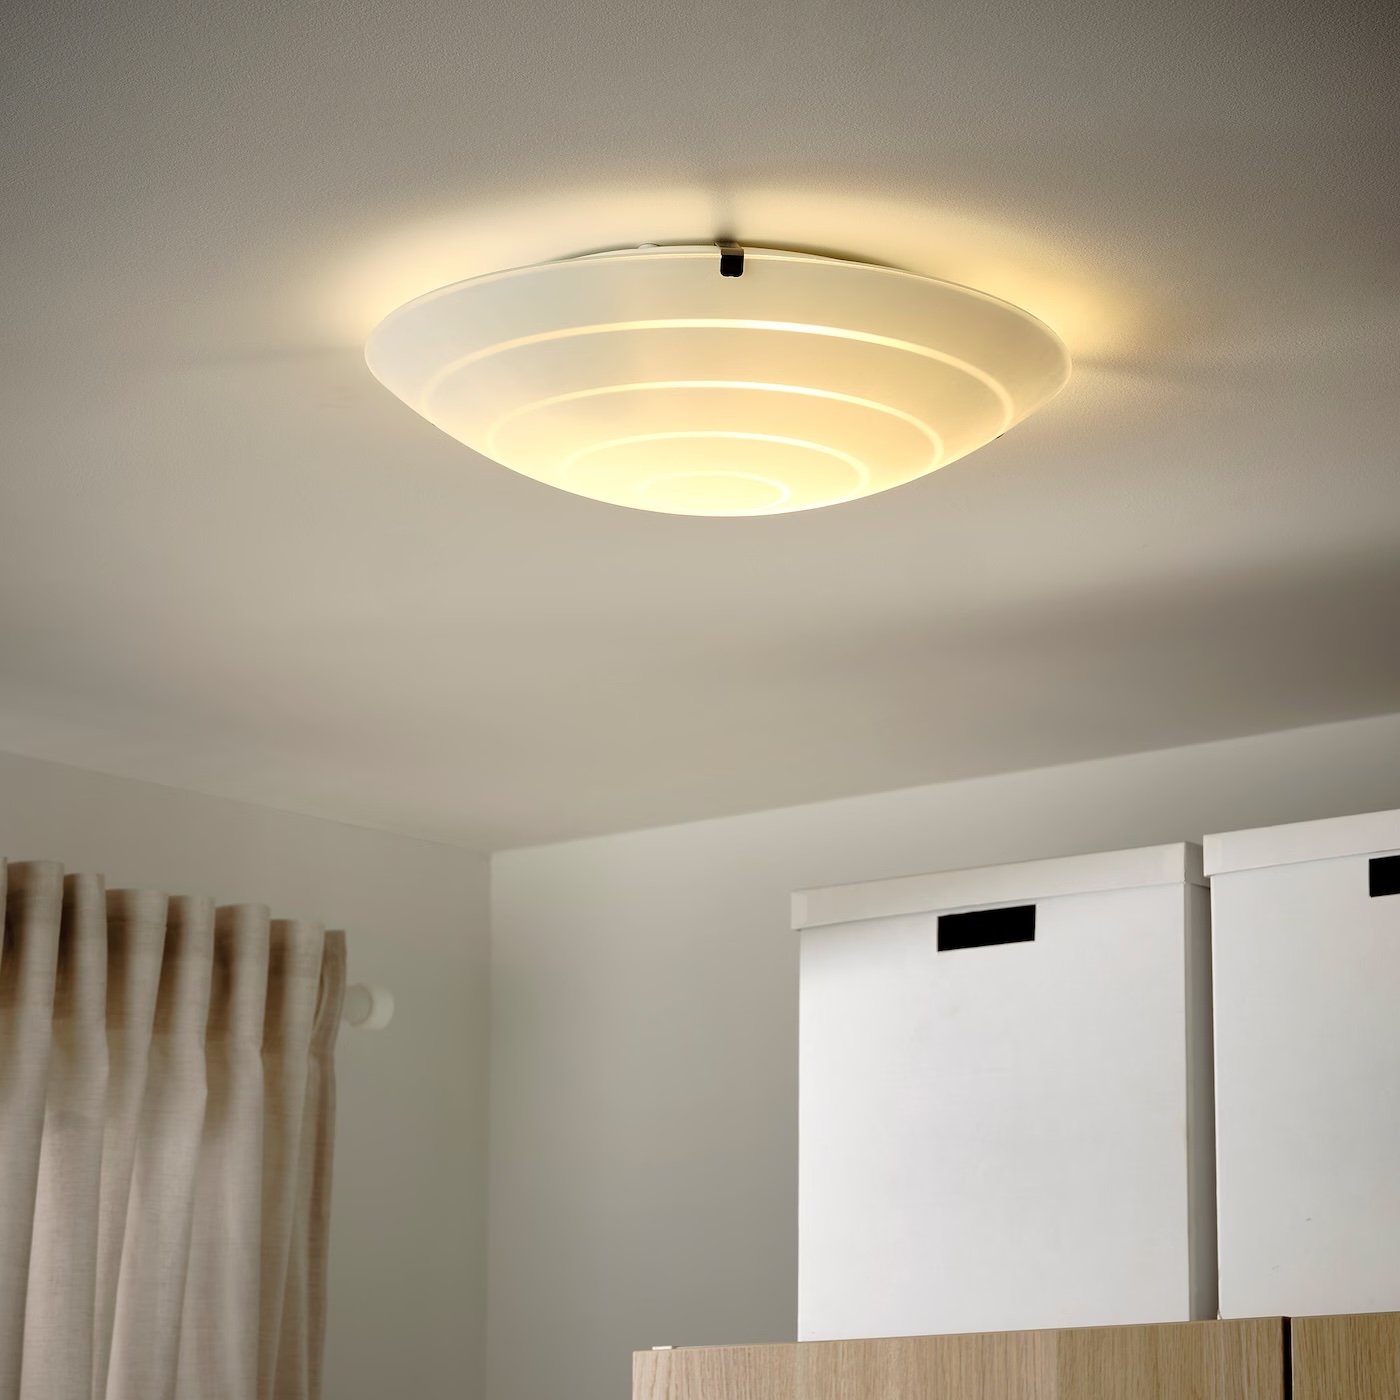 How To Measure A Ceiling Light